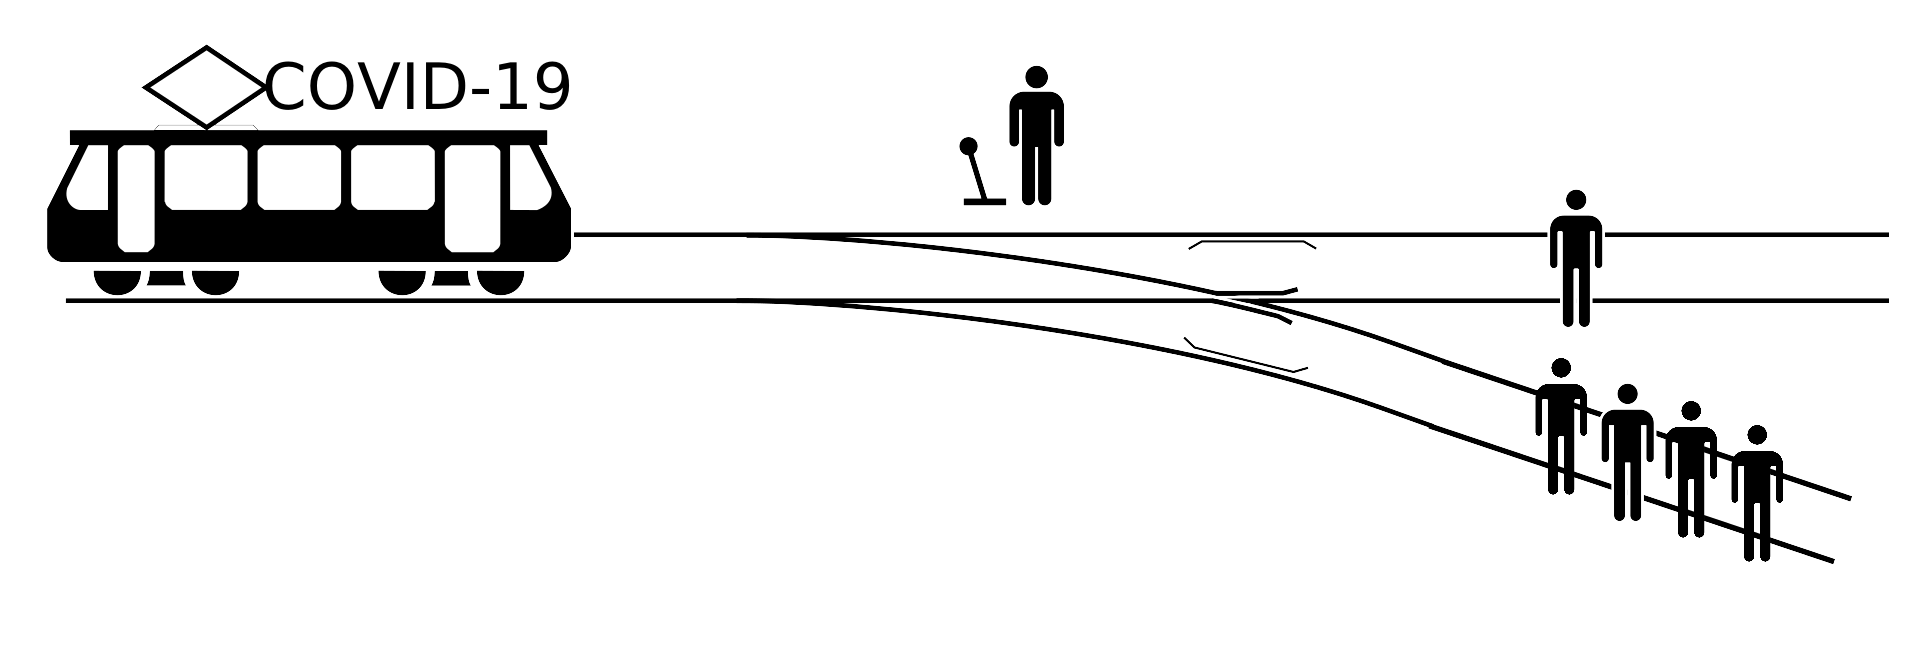 Image of trolley heading toward junction; 1 stick figure on main track, 4 stick figures on side track; a stick figure standing my lever that can switch the trolley's track